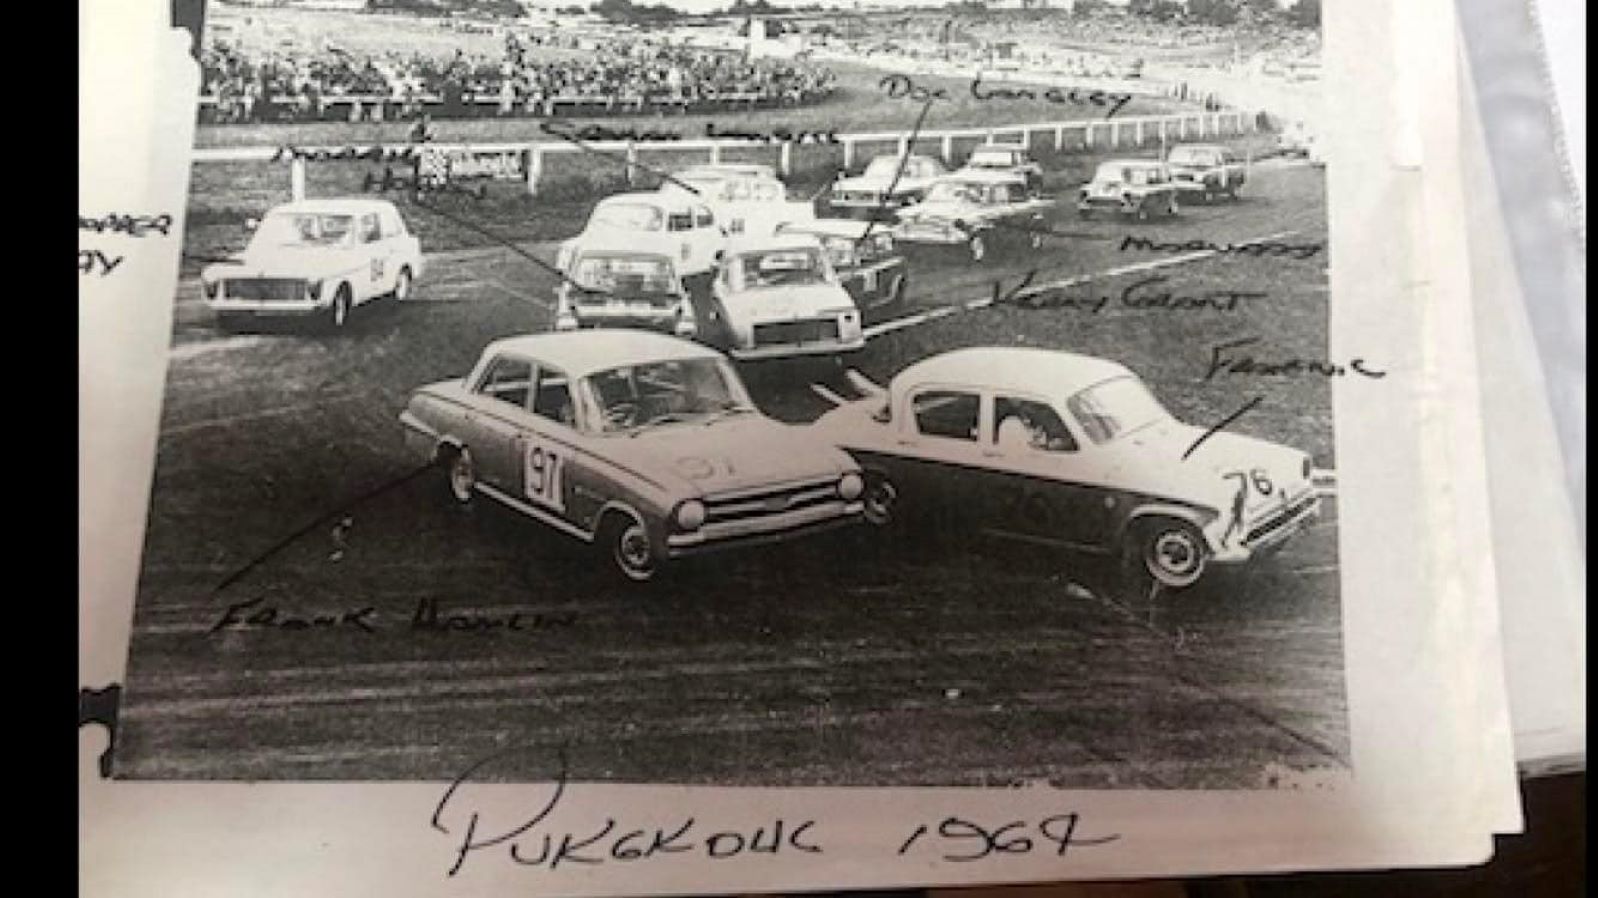 Name:  Pukekohe 1964 #022 1964 Saloon Car field at the Elbow - GP meeting Q 172 kb arch HVRA Bruce Dyer.jpg
Views: 384
Size:  172.4 KB